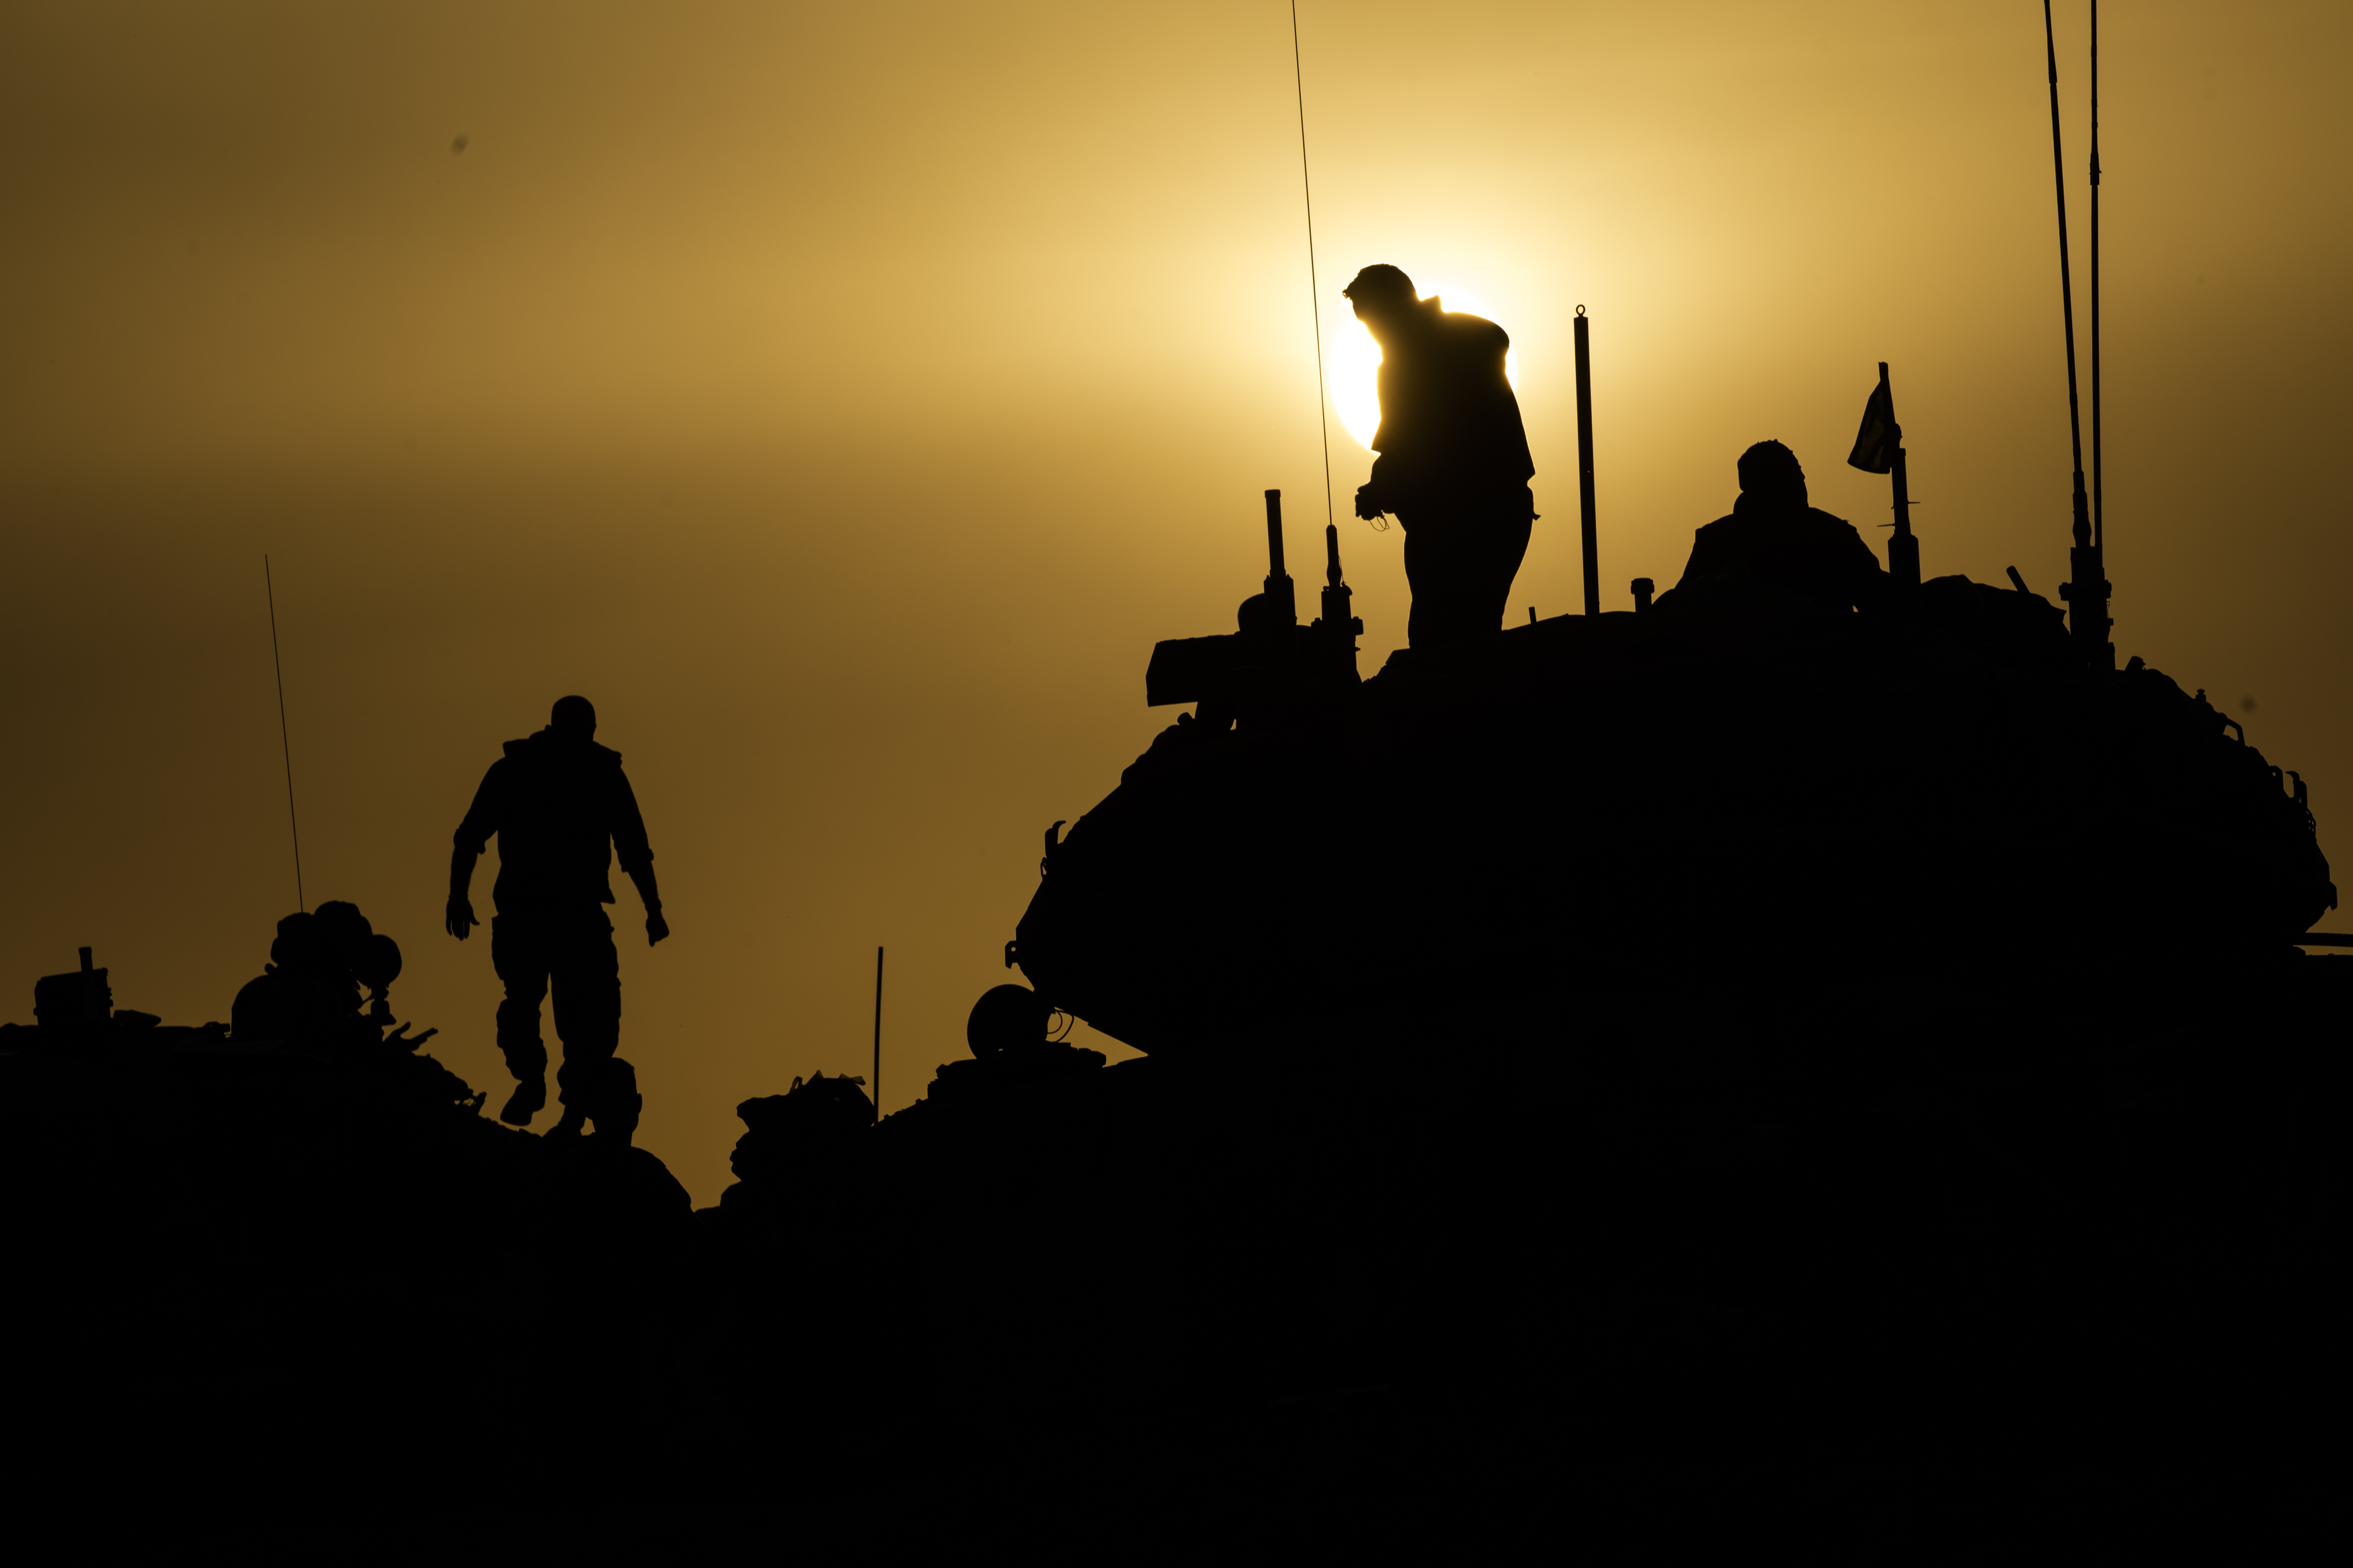 The black outline of an armored vehicle or tank and several human figures is silhouetted against a hazy, yellowish sky.